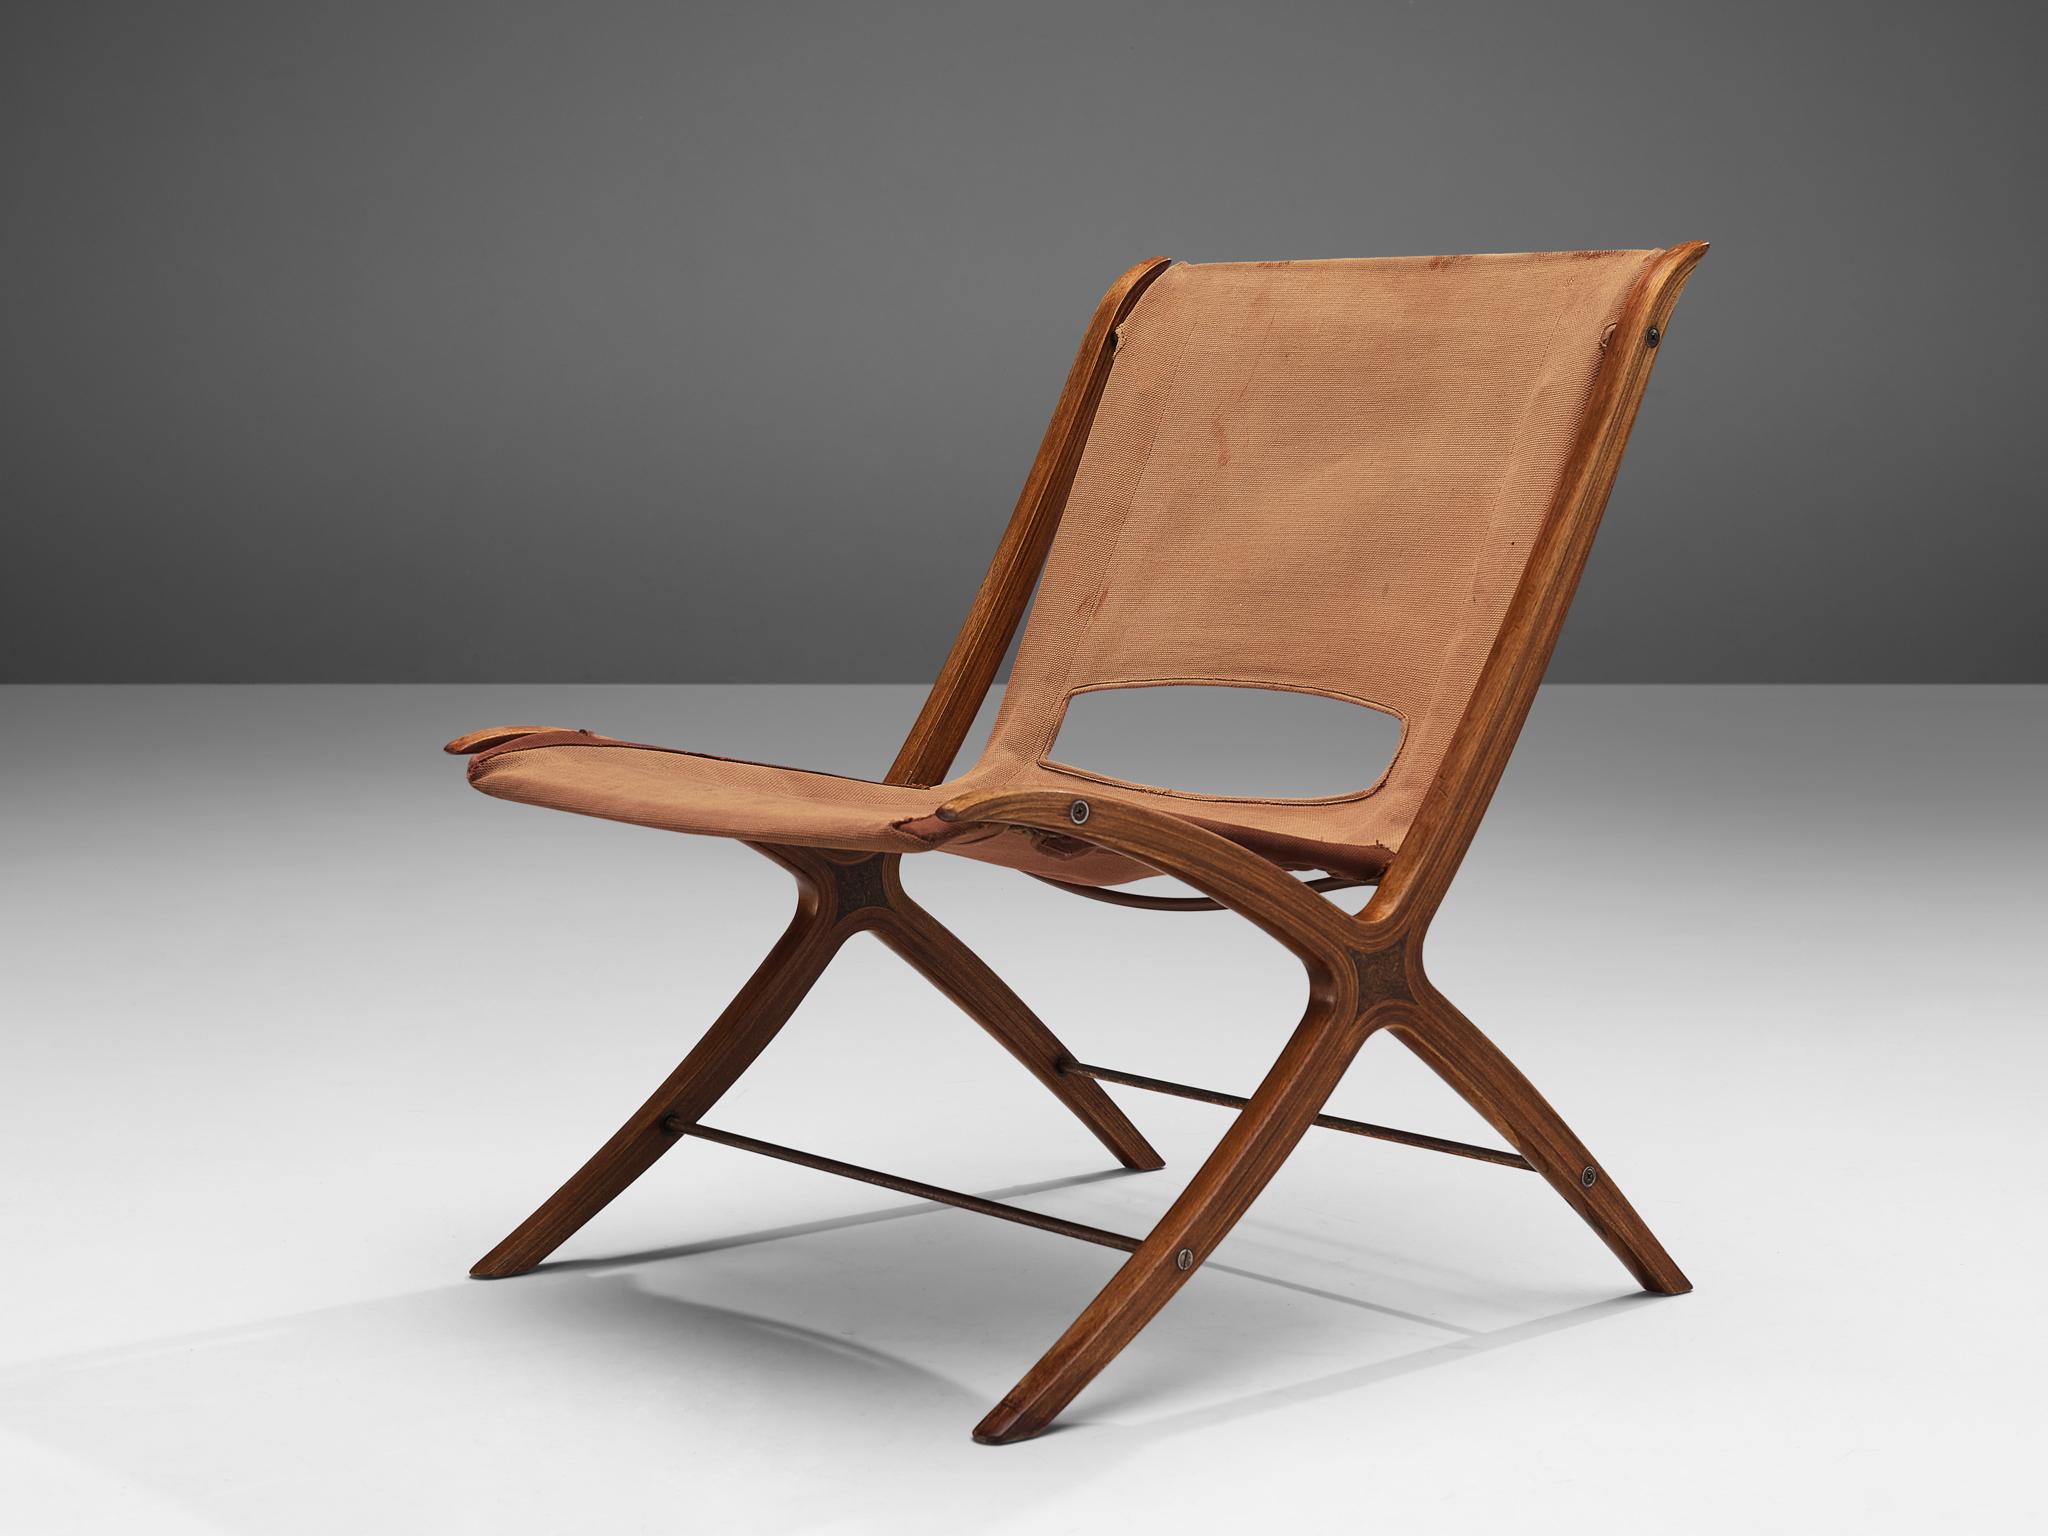 Peter Hvidt & Orla Mølgaard Nielsen ‘X’ lounge chair, model '6103', canvas, mahogany, burlwood, metal, Denmark, 1958.

Crafted in 1958, the present X lounge chair is a creation of the esteemed Danish duo, Peter Hvidt and Orla Mølgaard Nielsen.